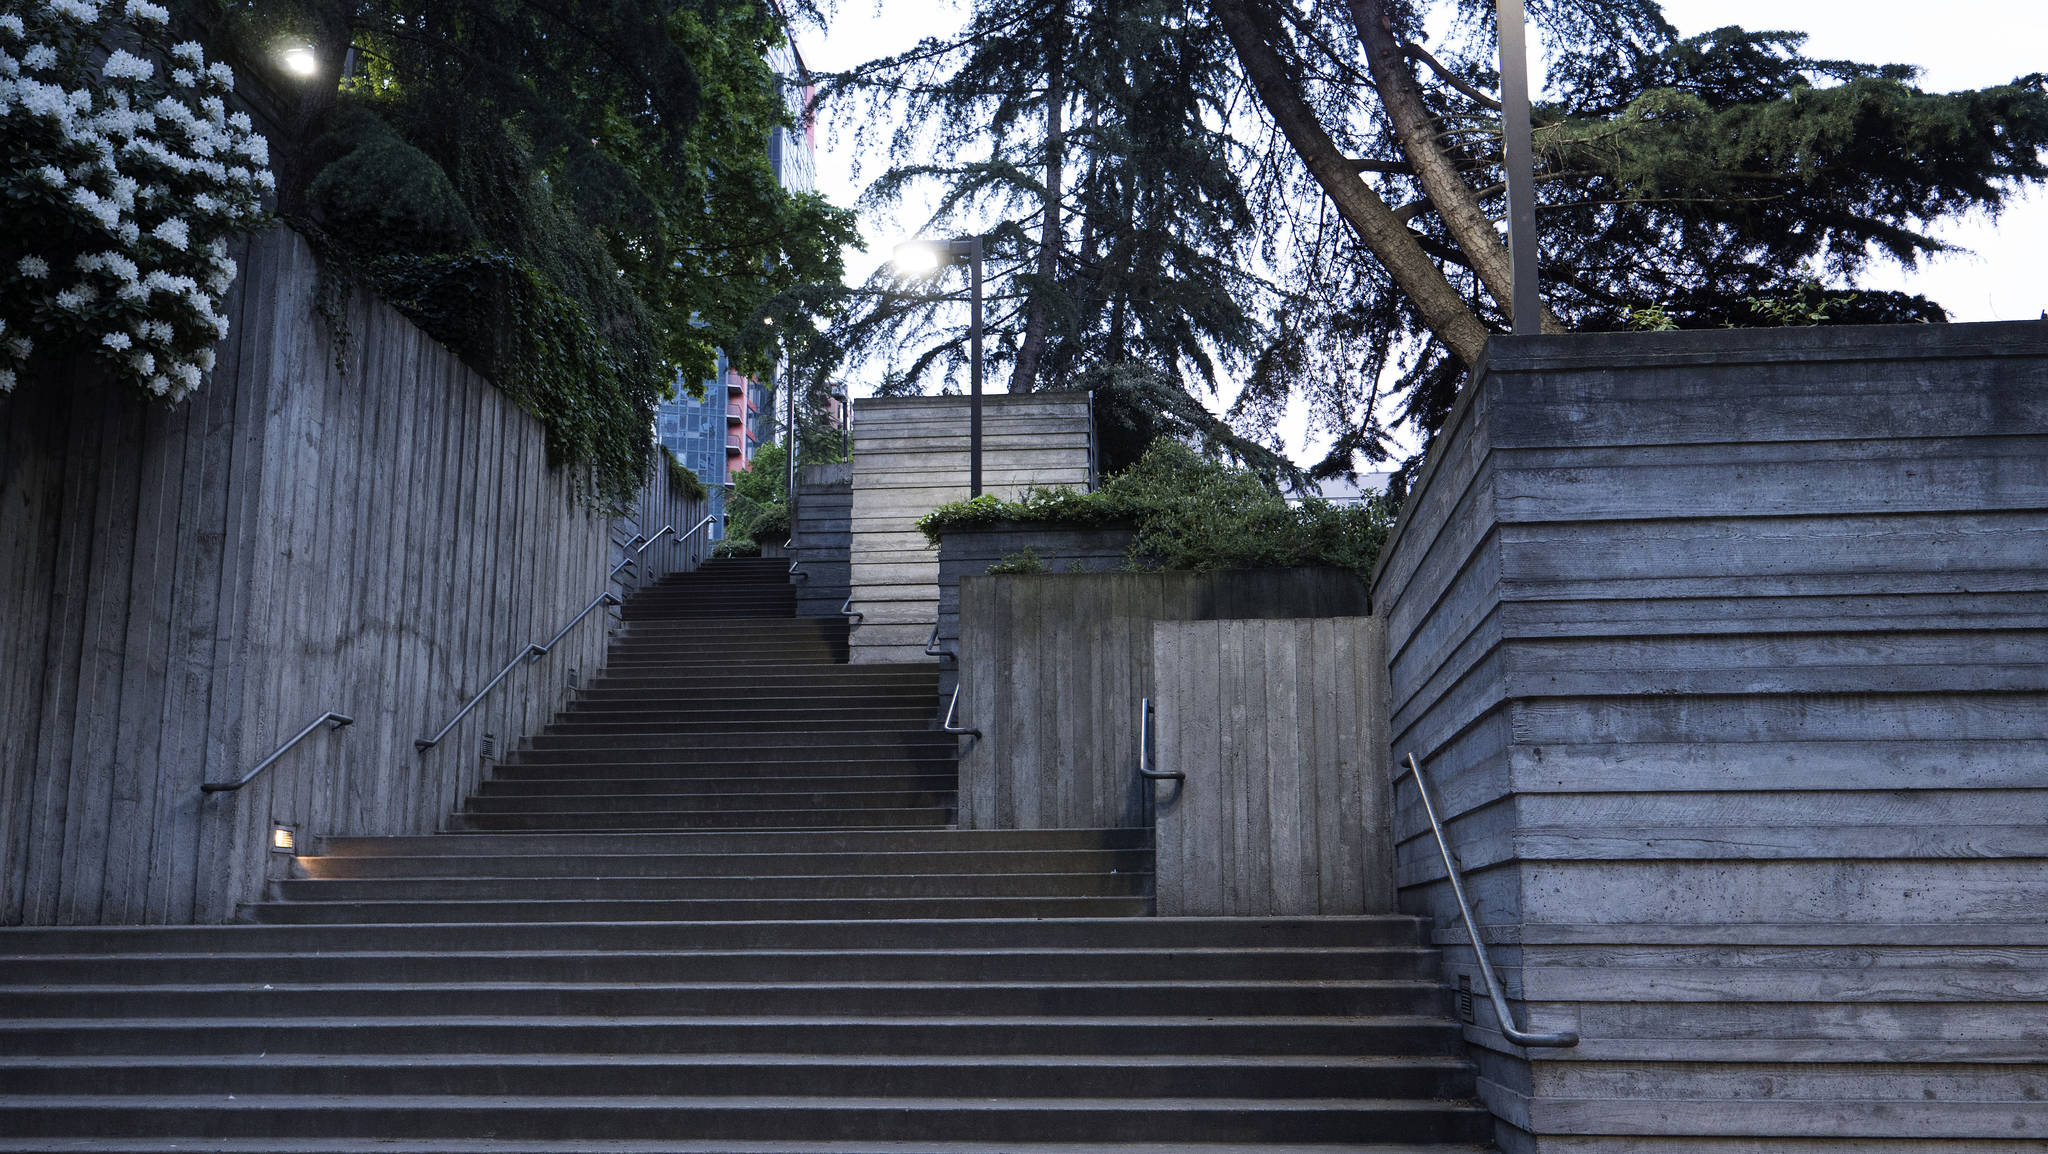 Taking the stairs at Freeway Park. Photo by Keiko DeLuca